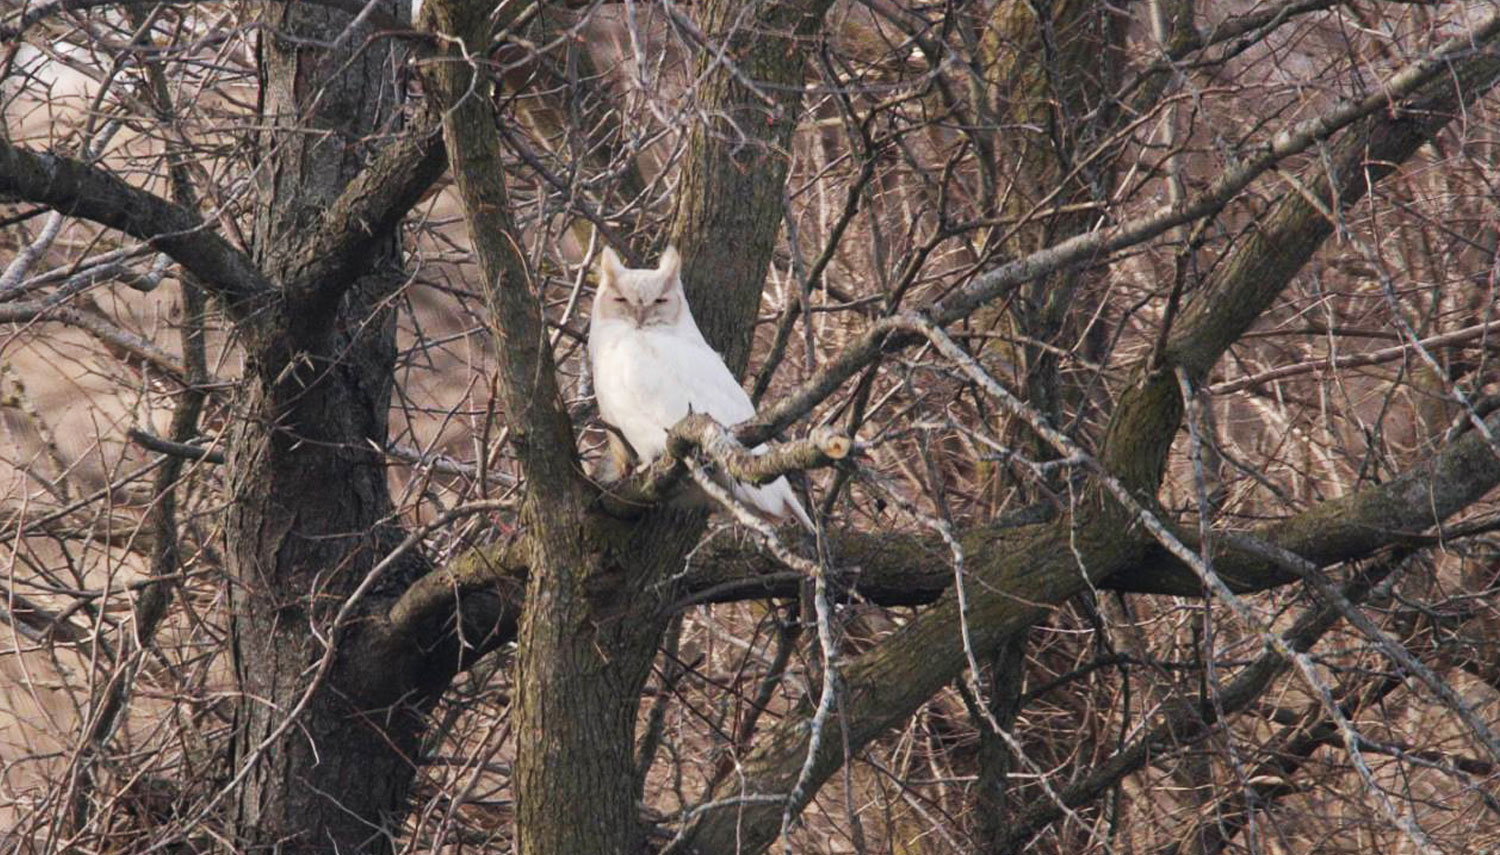 A white great horned owl in a tree